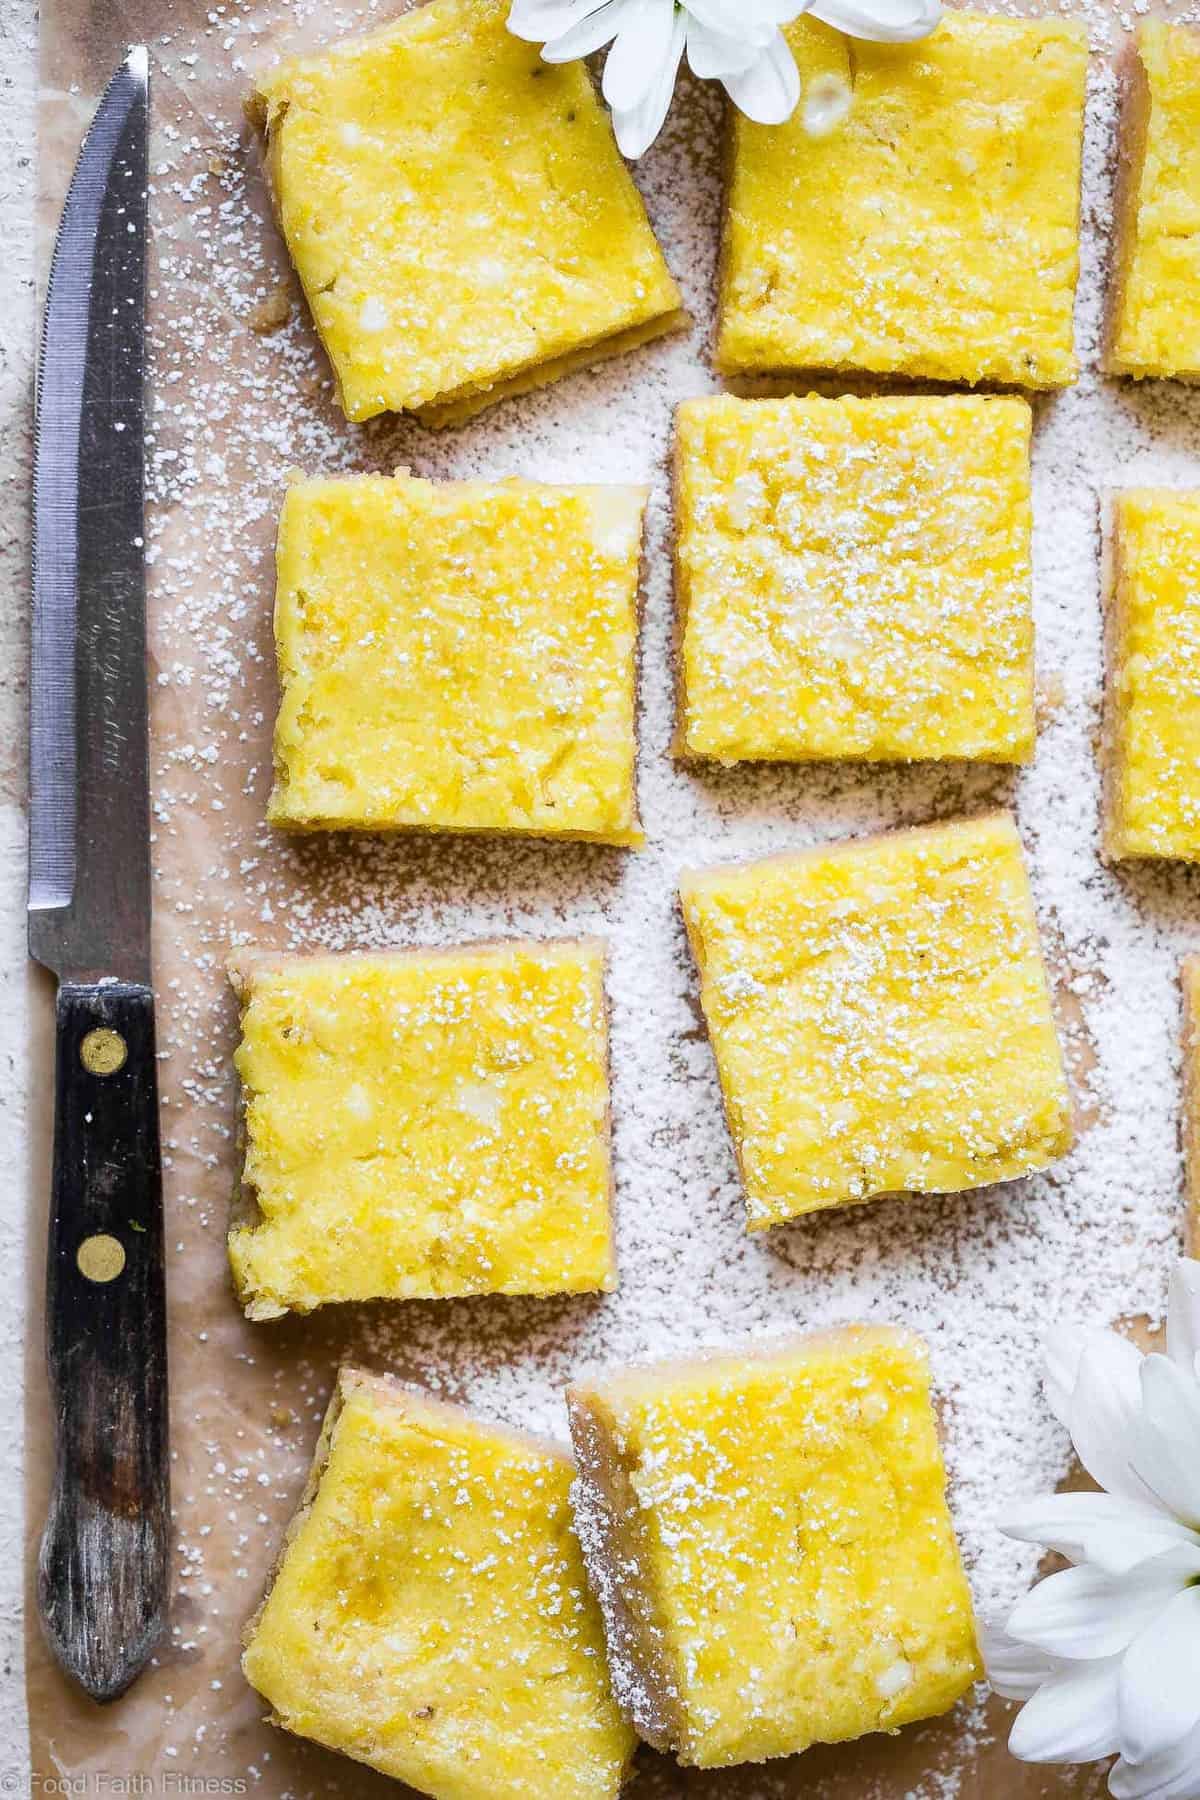 Keto Lemon Bars - These easy, gluten free lemon bars are only 5 ingredients and SO delicious! You will never believe they are only 100 calories, low carb and sugar free! | #Foodfaithfitness | #Glutenfree #Lowcarb #keto #sugarfree #healthy